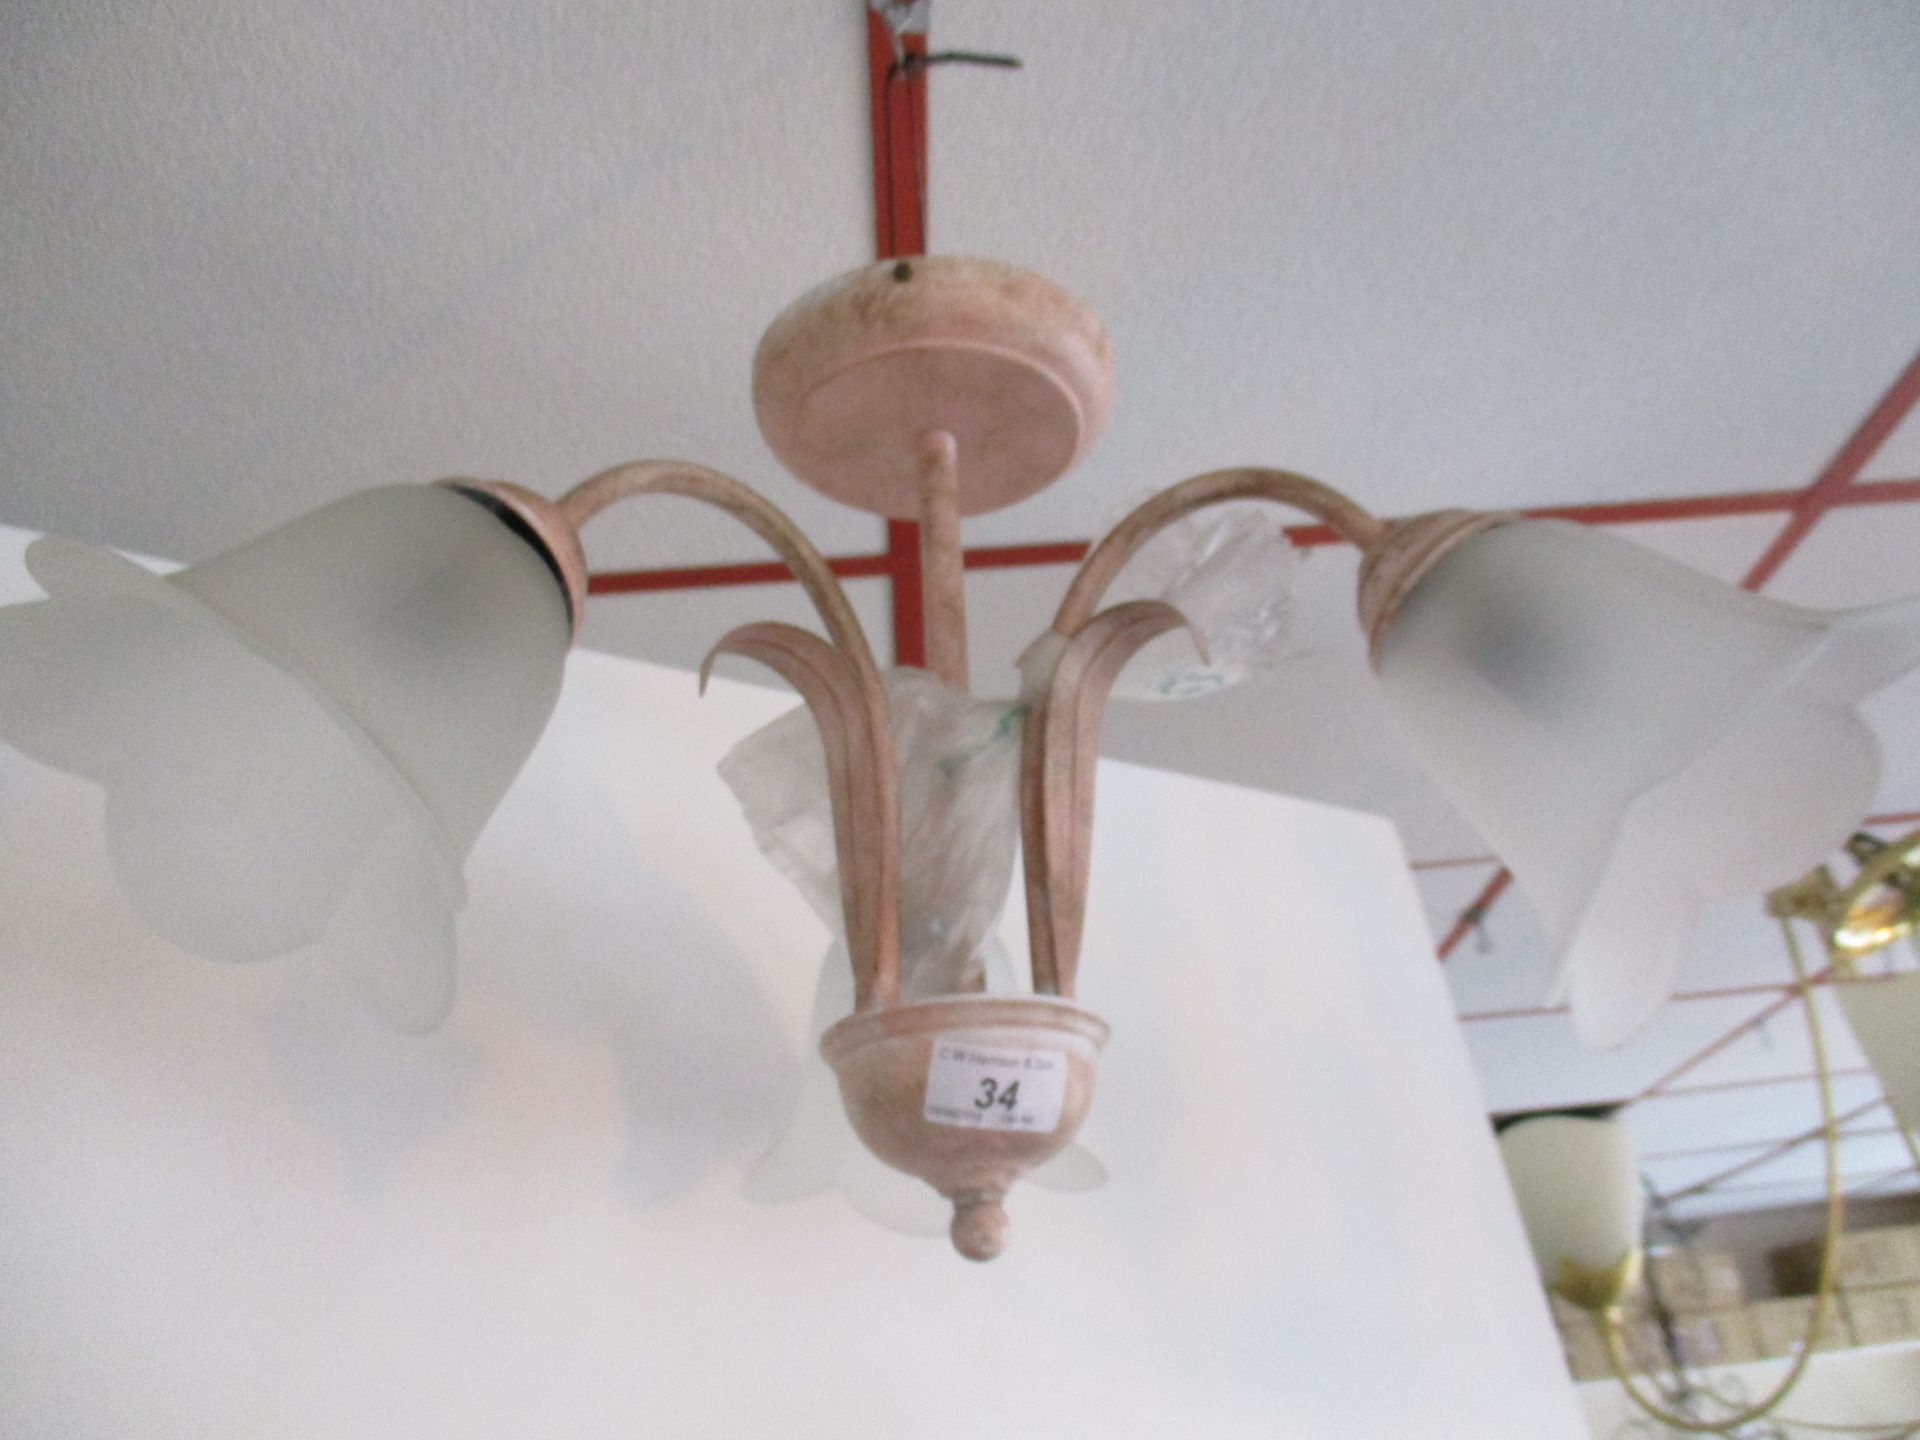 Decorative pink distressed finish three stem ceiling light with floral design glass shades RRP £50